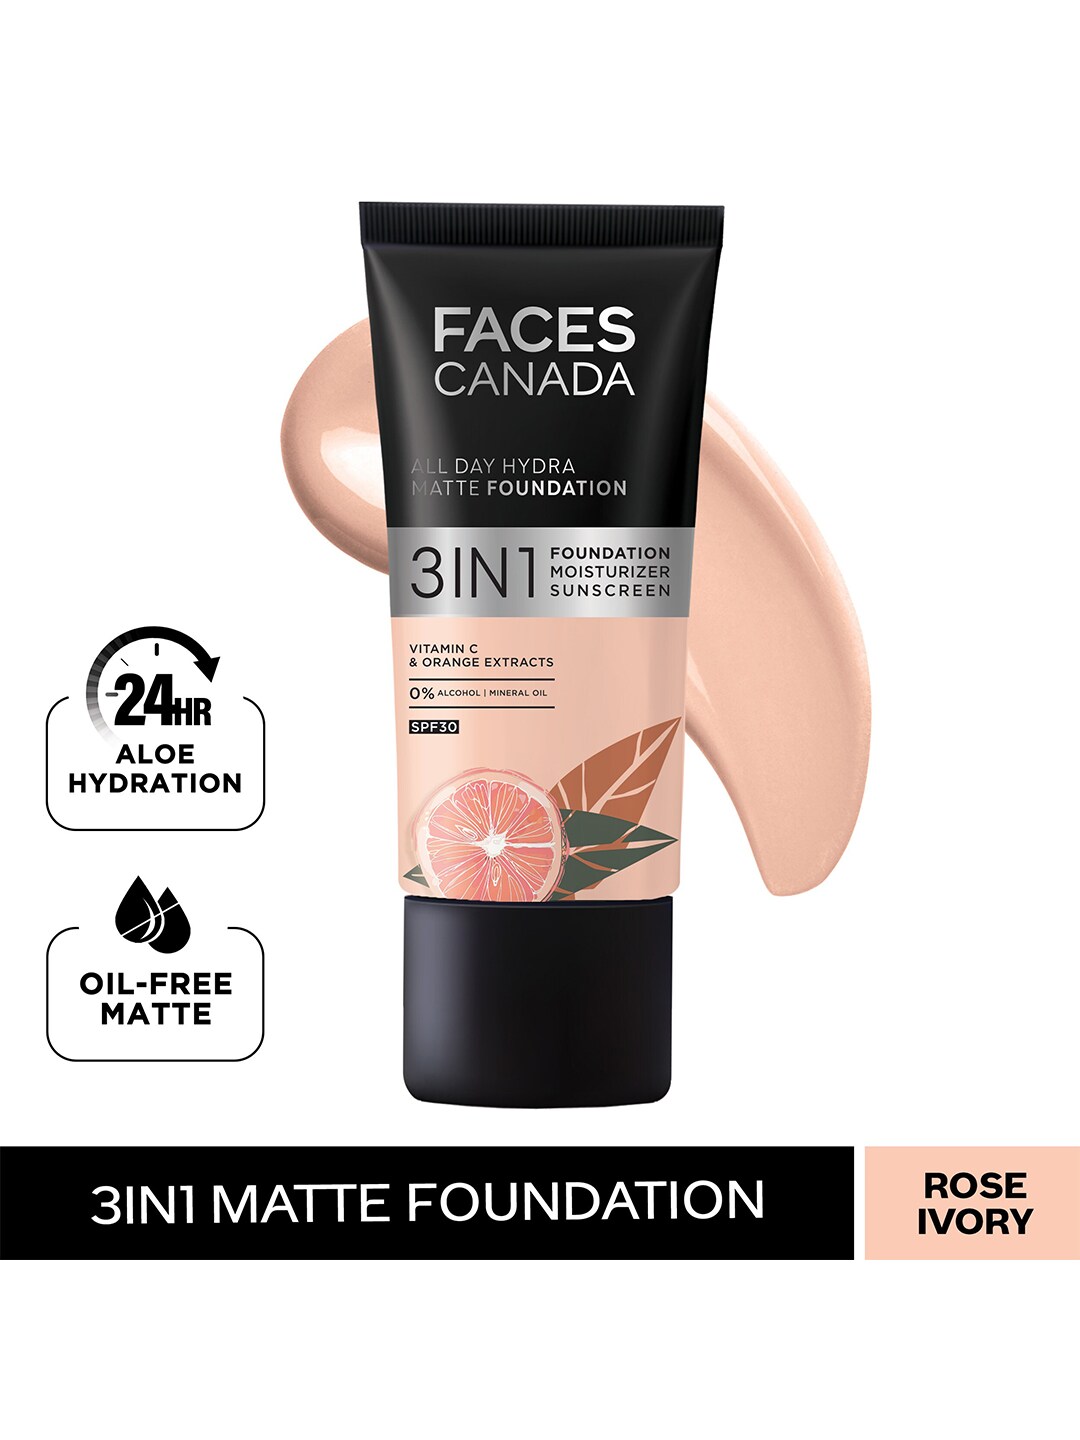 FACES CANADA SPF 30 All Day Hydra 3 In 1 Matte Foundation 25ml - Rose Ivory 011 Price in India